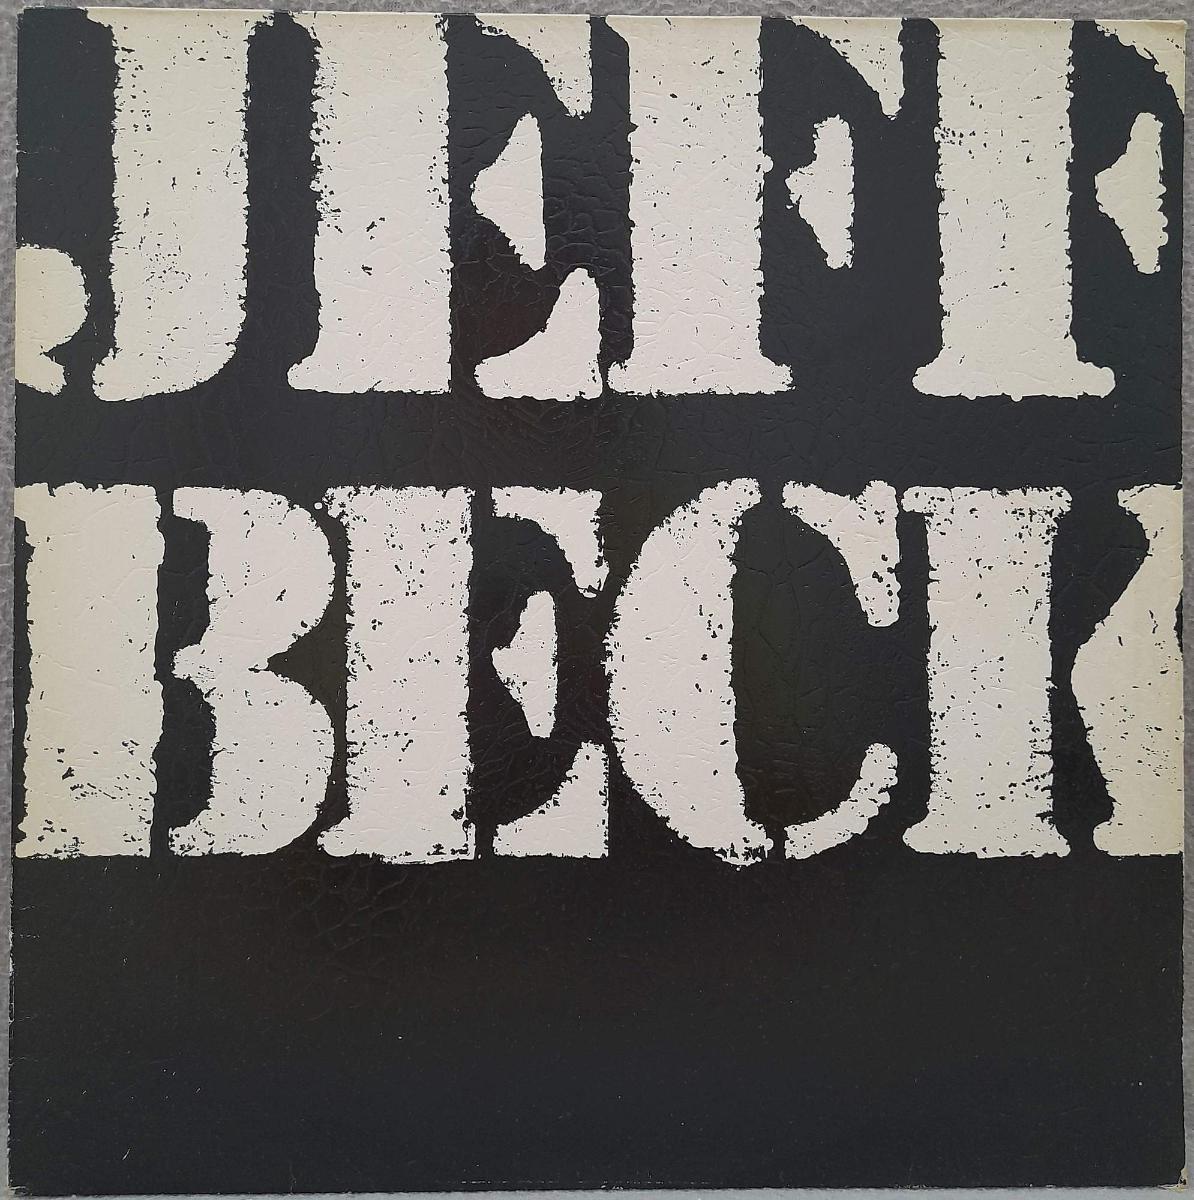 LP Jeff Beck - There & Back, 1980 EX